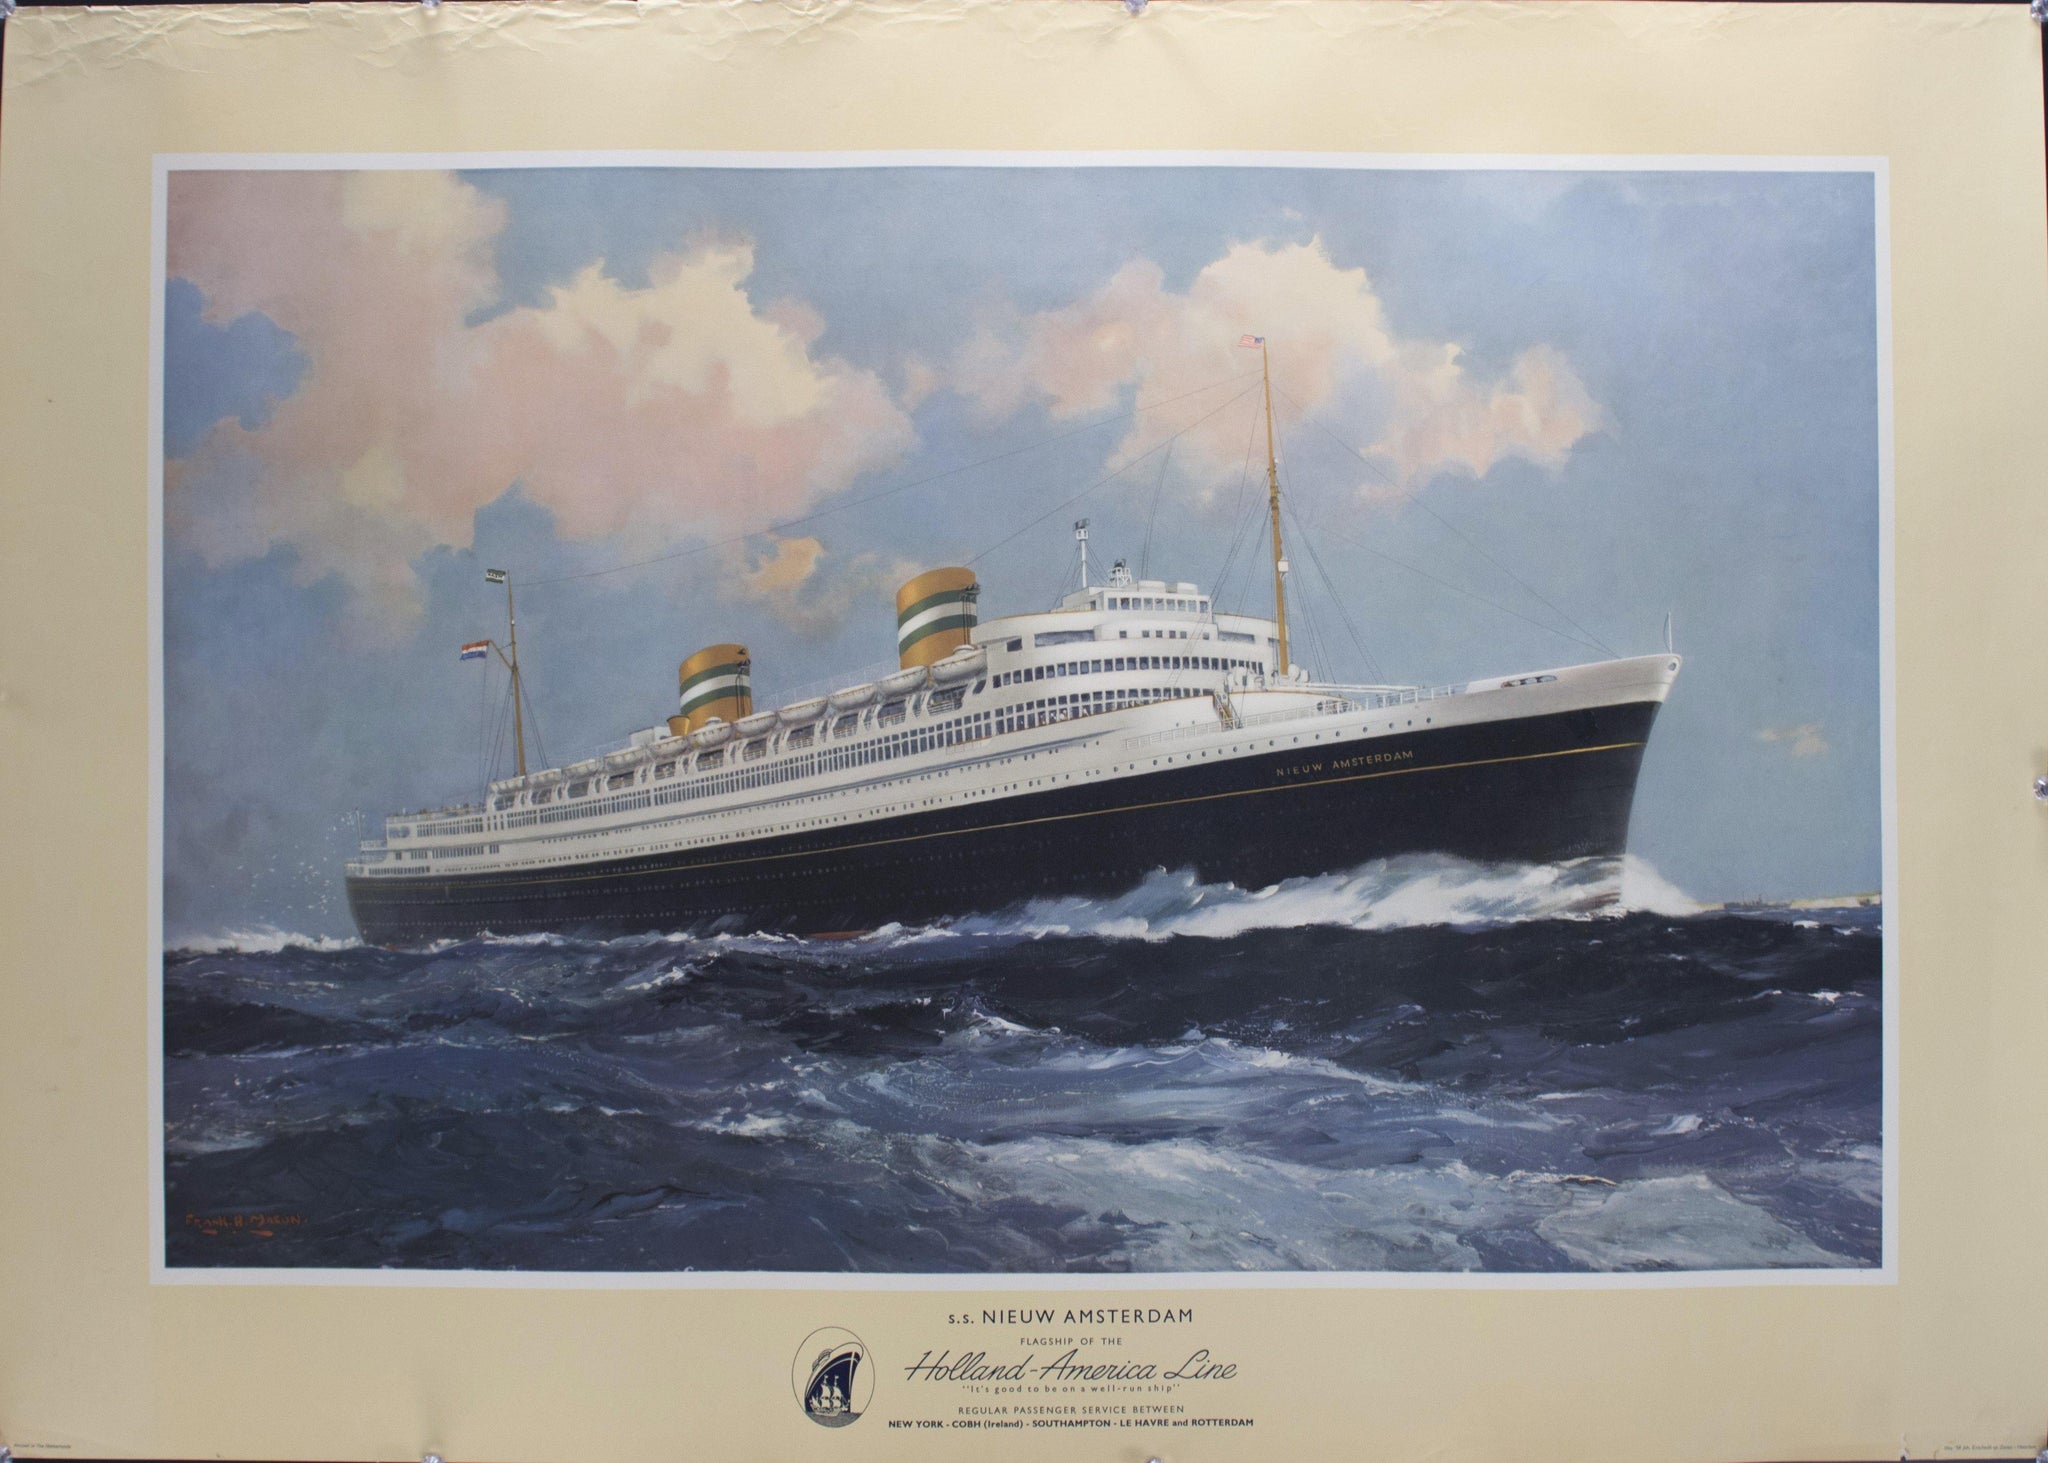 1950 S.S. Nieuw Amsterdam | Flagship of the Holland-America Line - Golden Age Posters